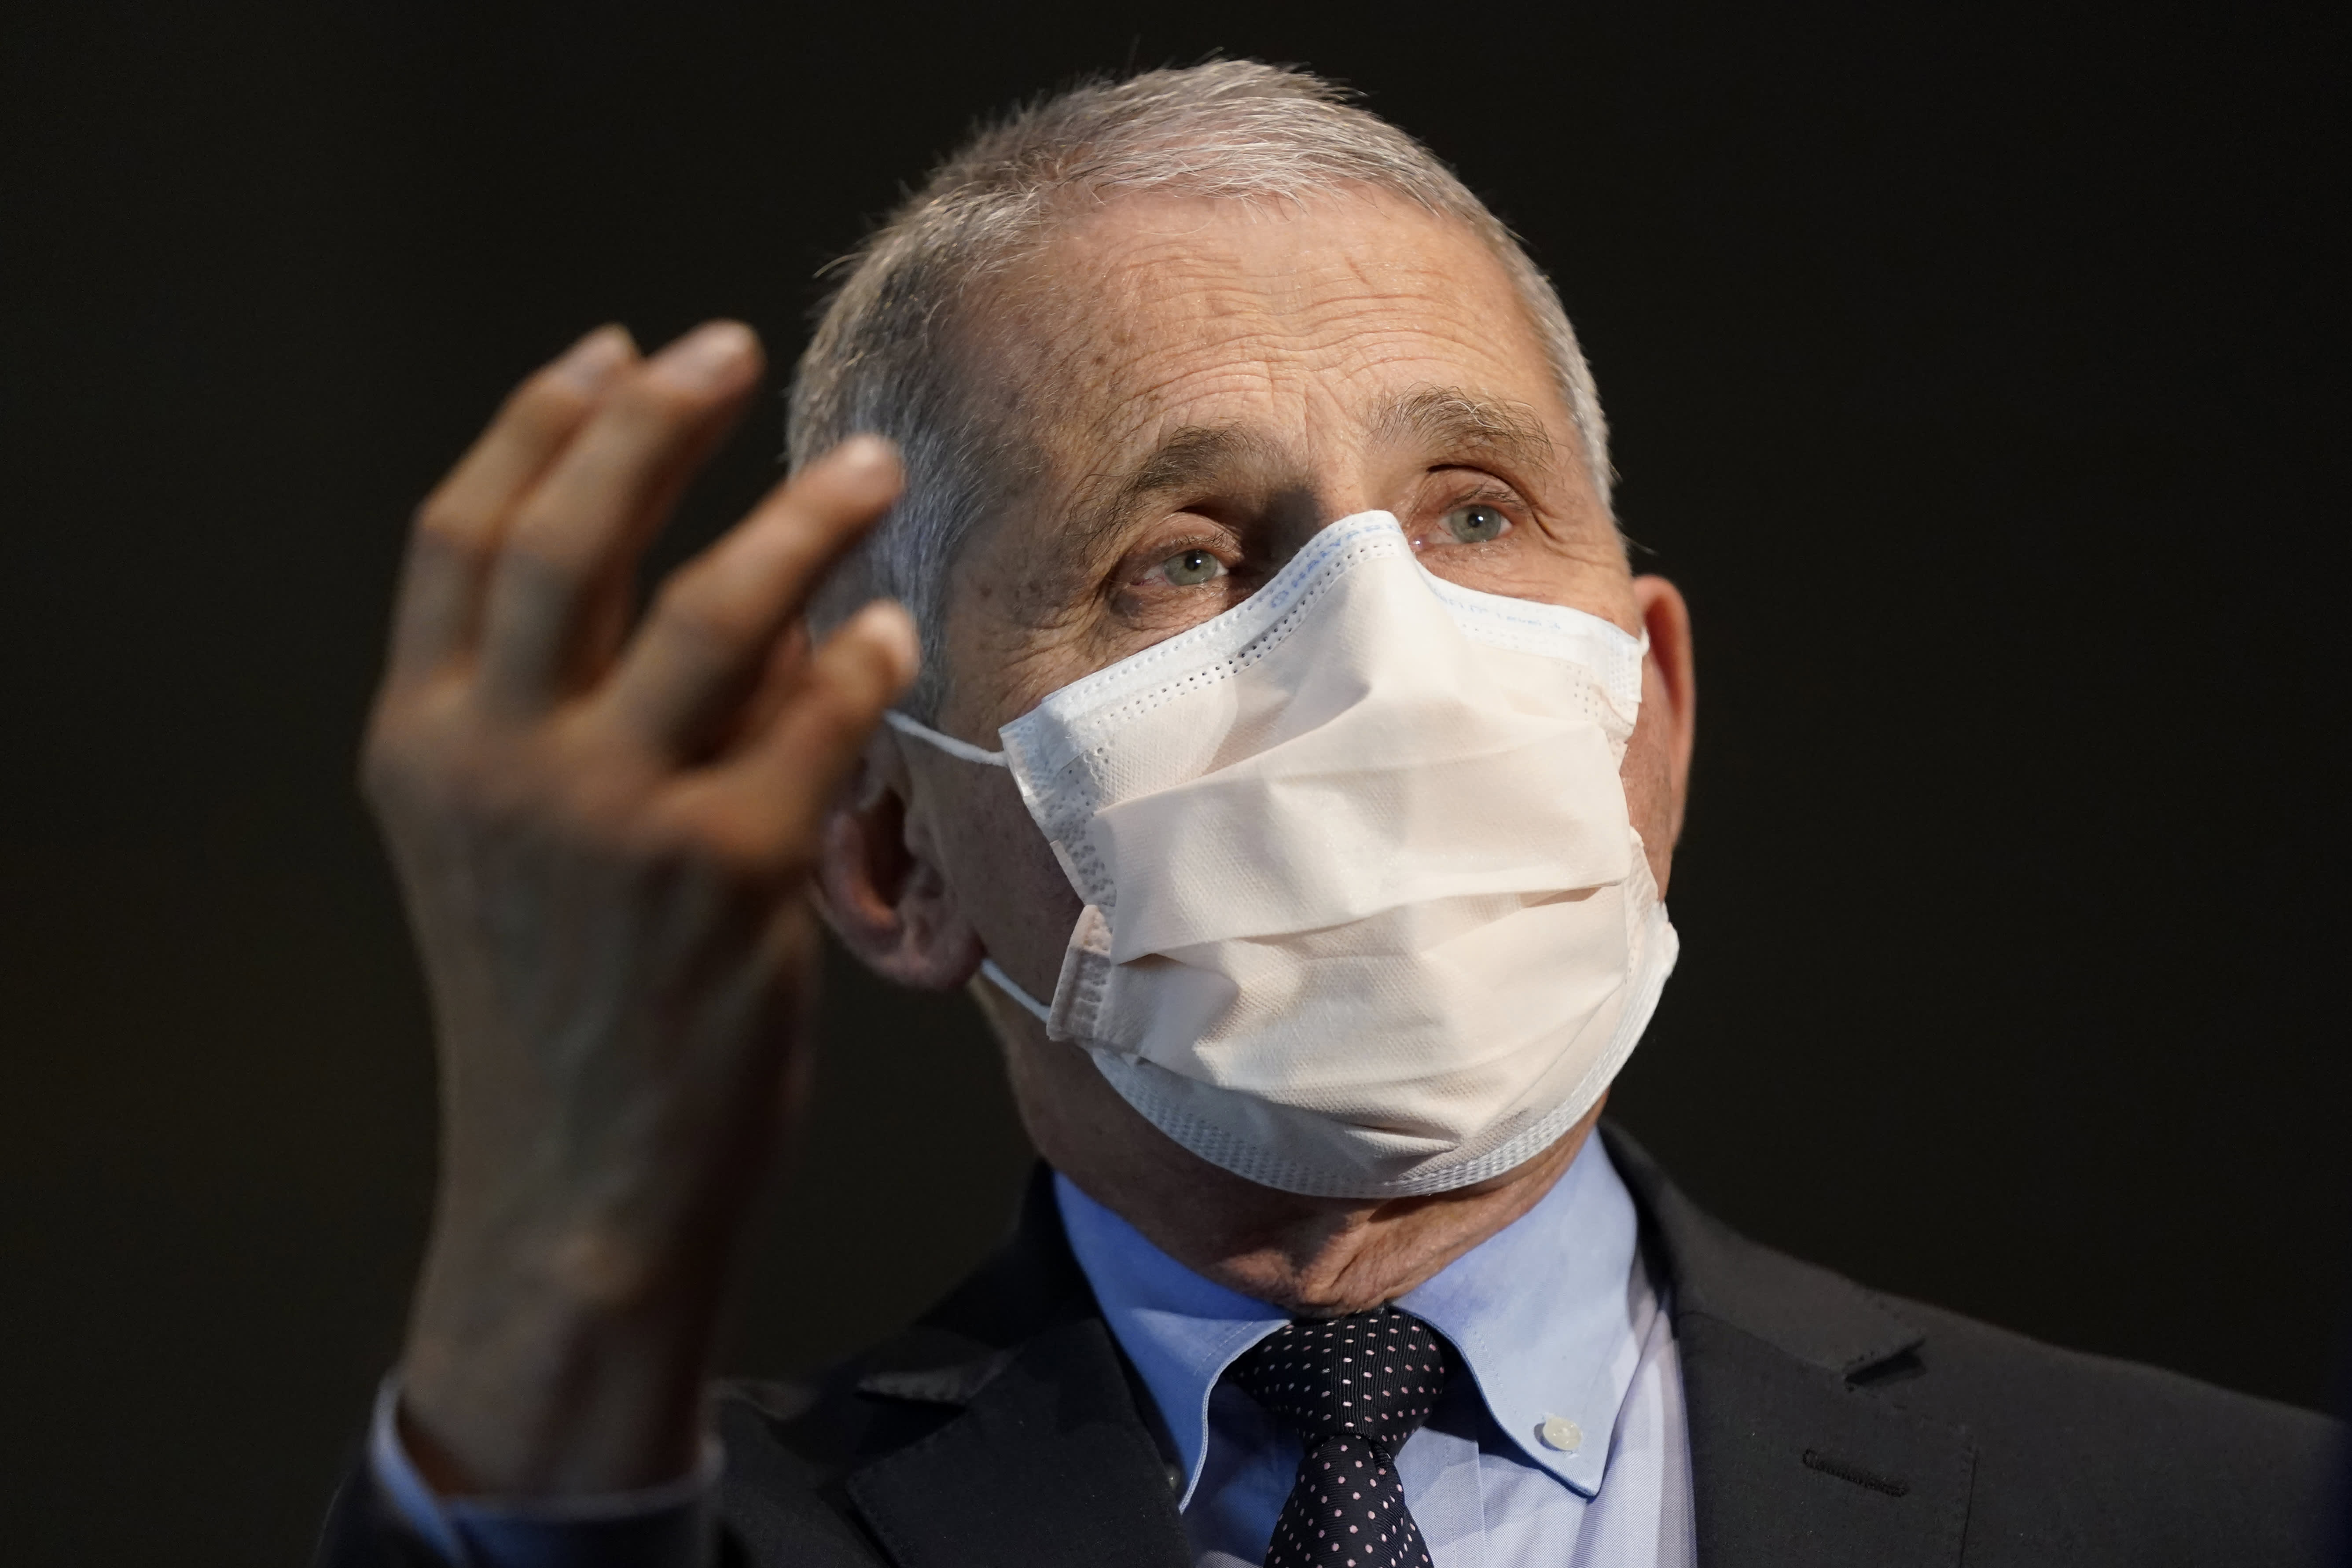 Dr. Fauci says the slow launch of the Covid vaccine has been ‘disappointing’